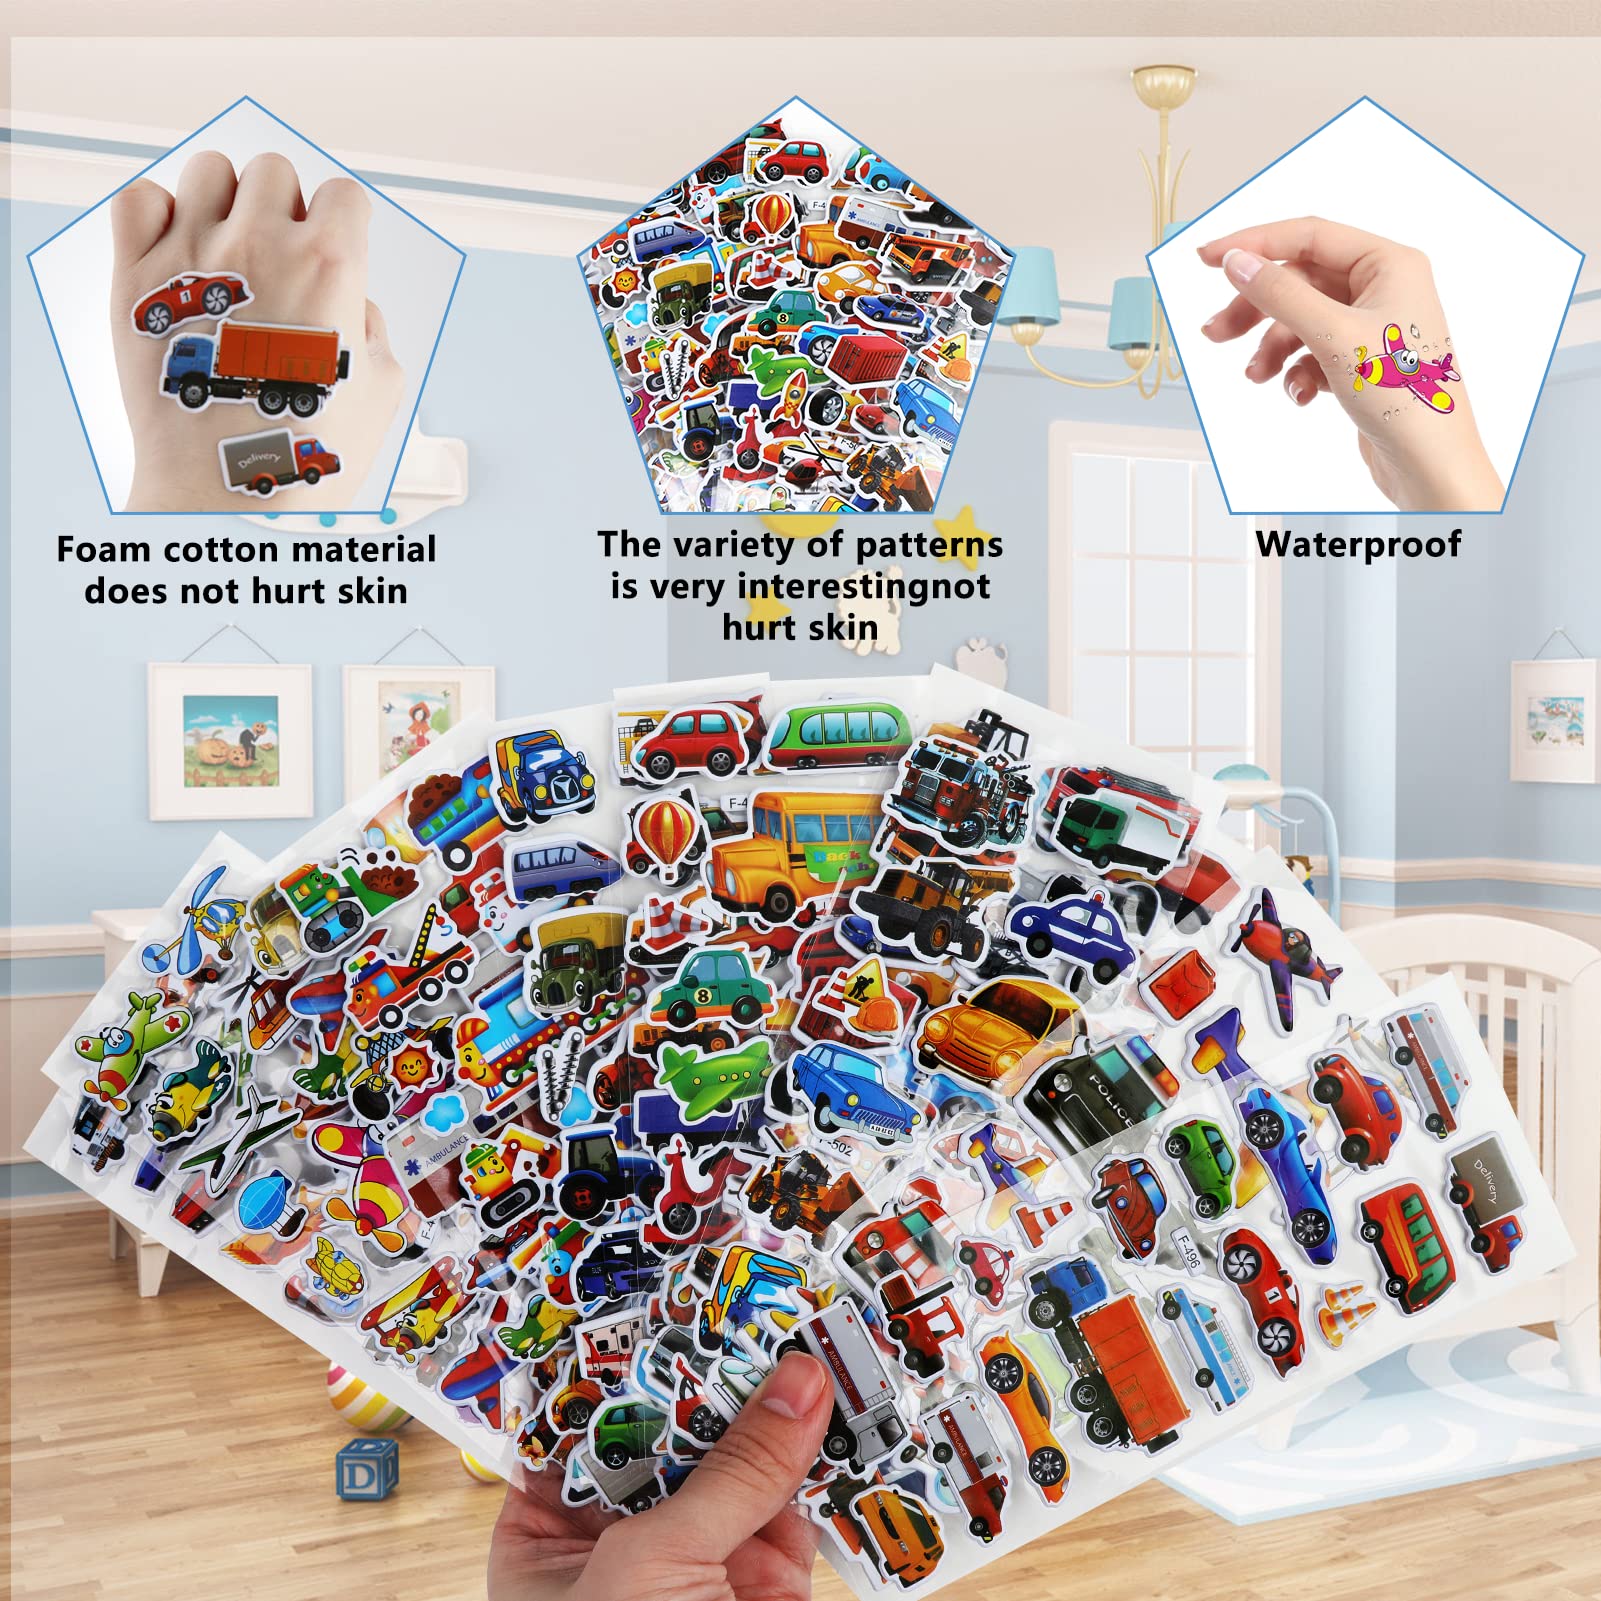 12 Sheets Cars 3D Puffy Stickers, Car Theme Set DIY Decoration Craft Activities and Party Bag Filler Favours-Vehicle Stickers for Kids with Cars Airplane Train Ambulance Fire Trucks and More (car)